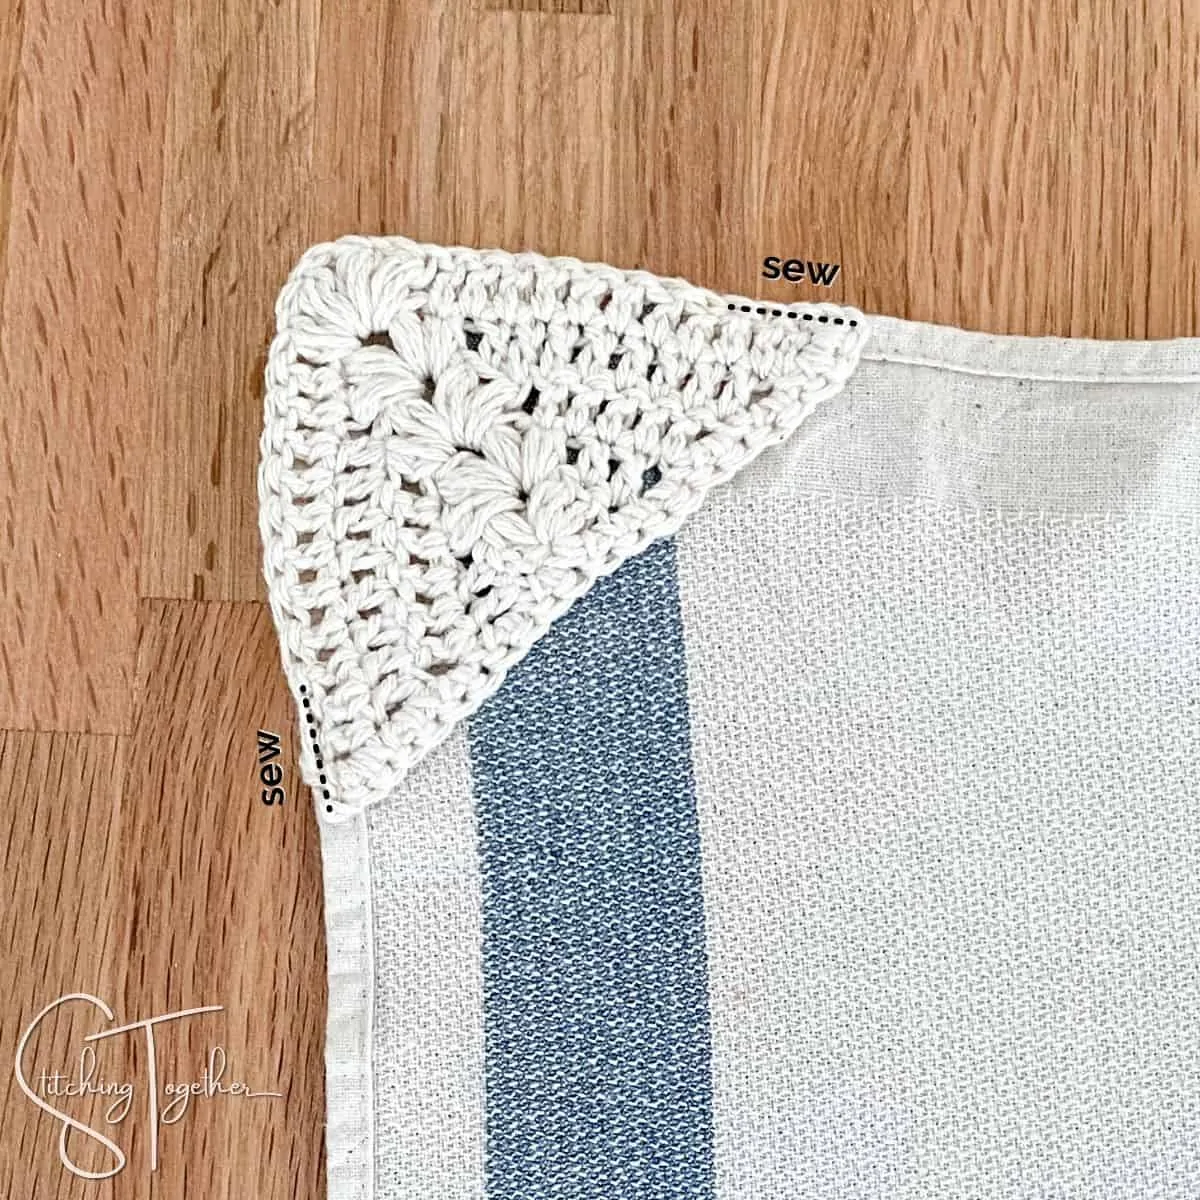 lines showing where to sew to attach the towel topper